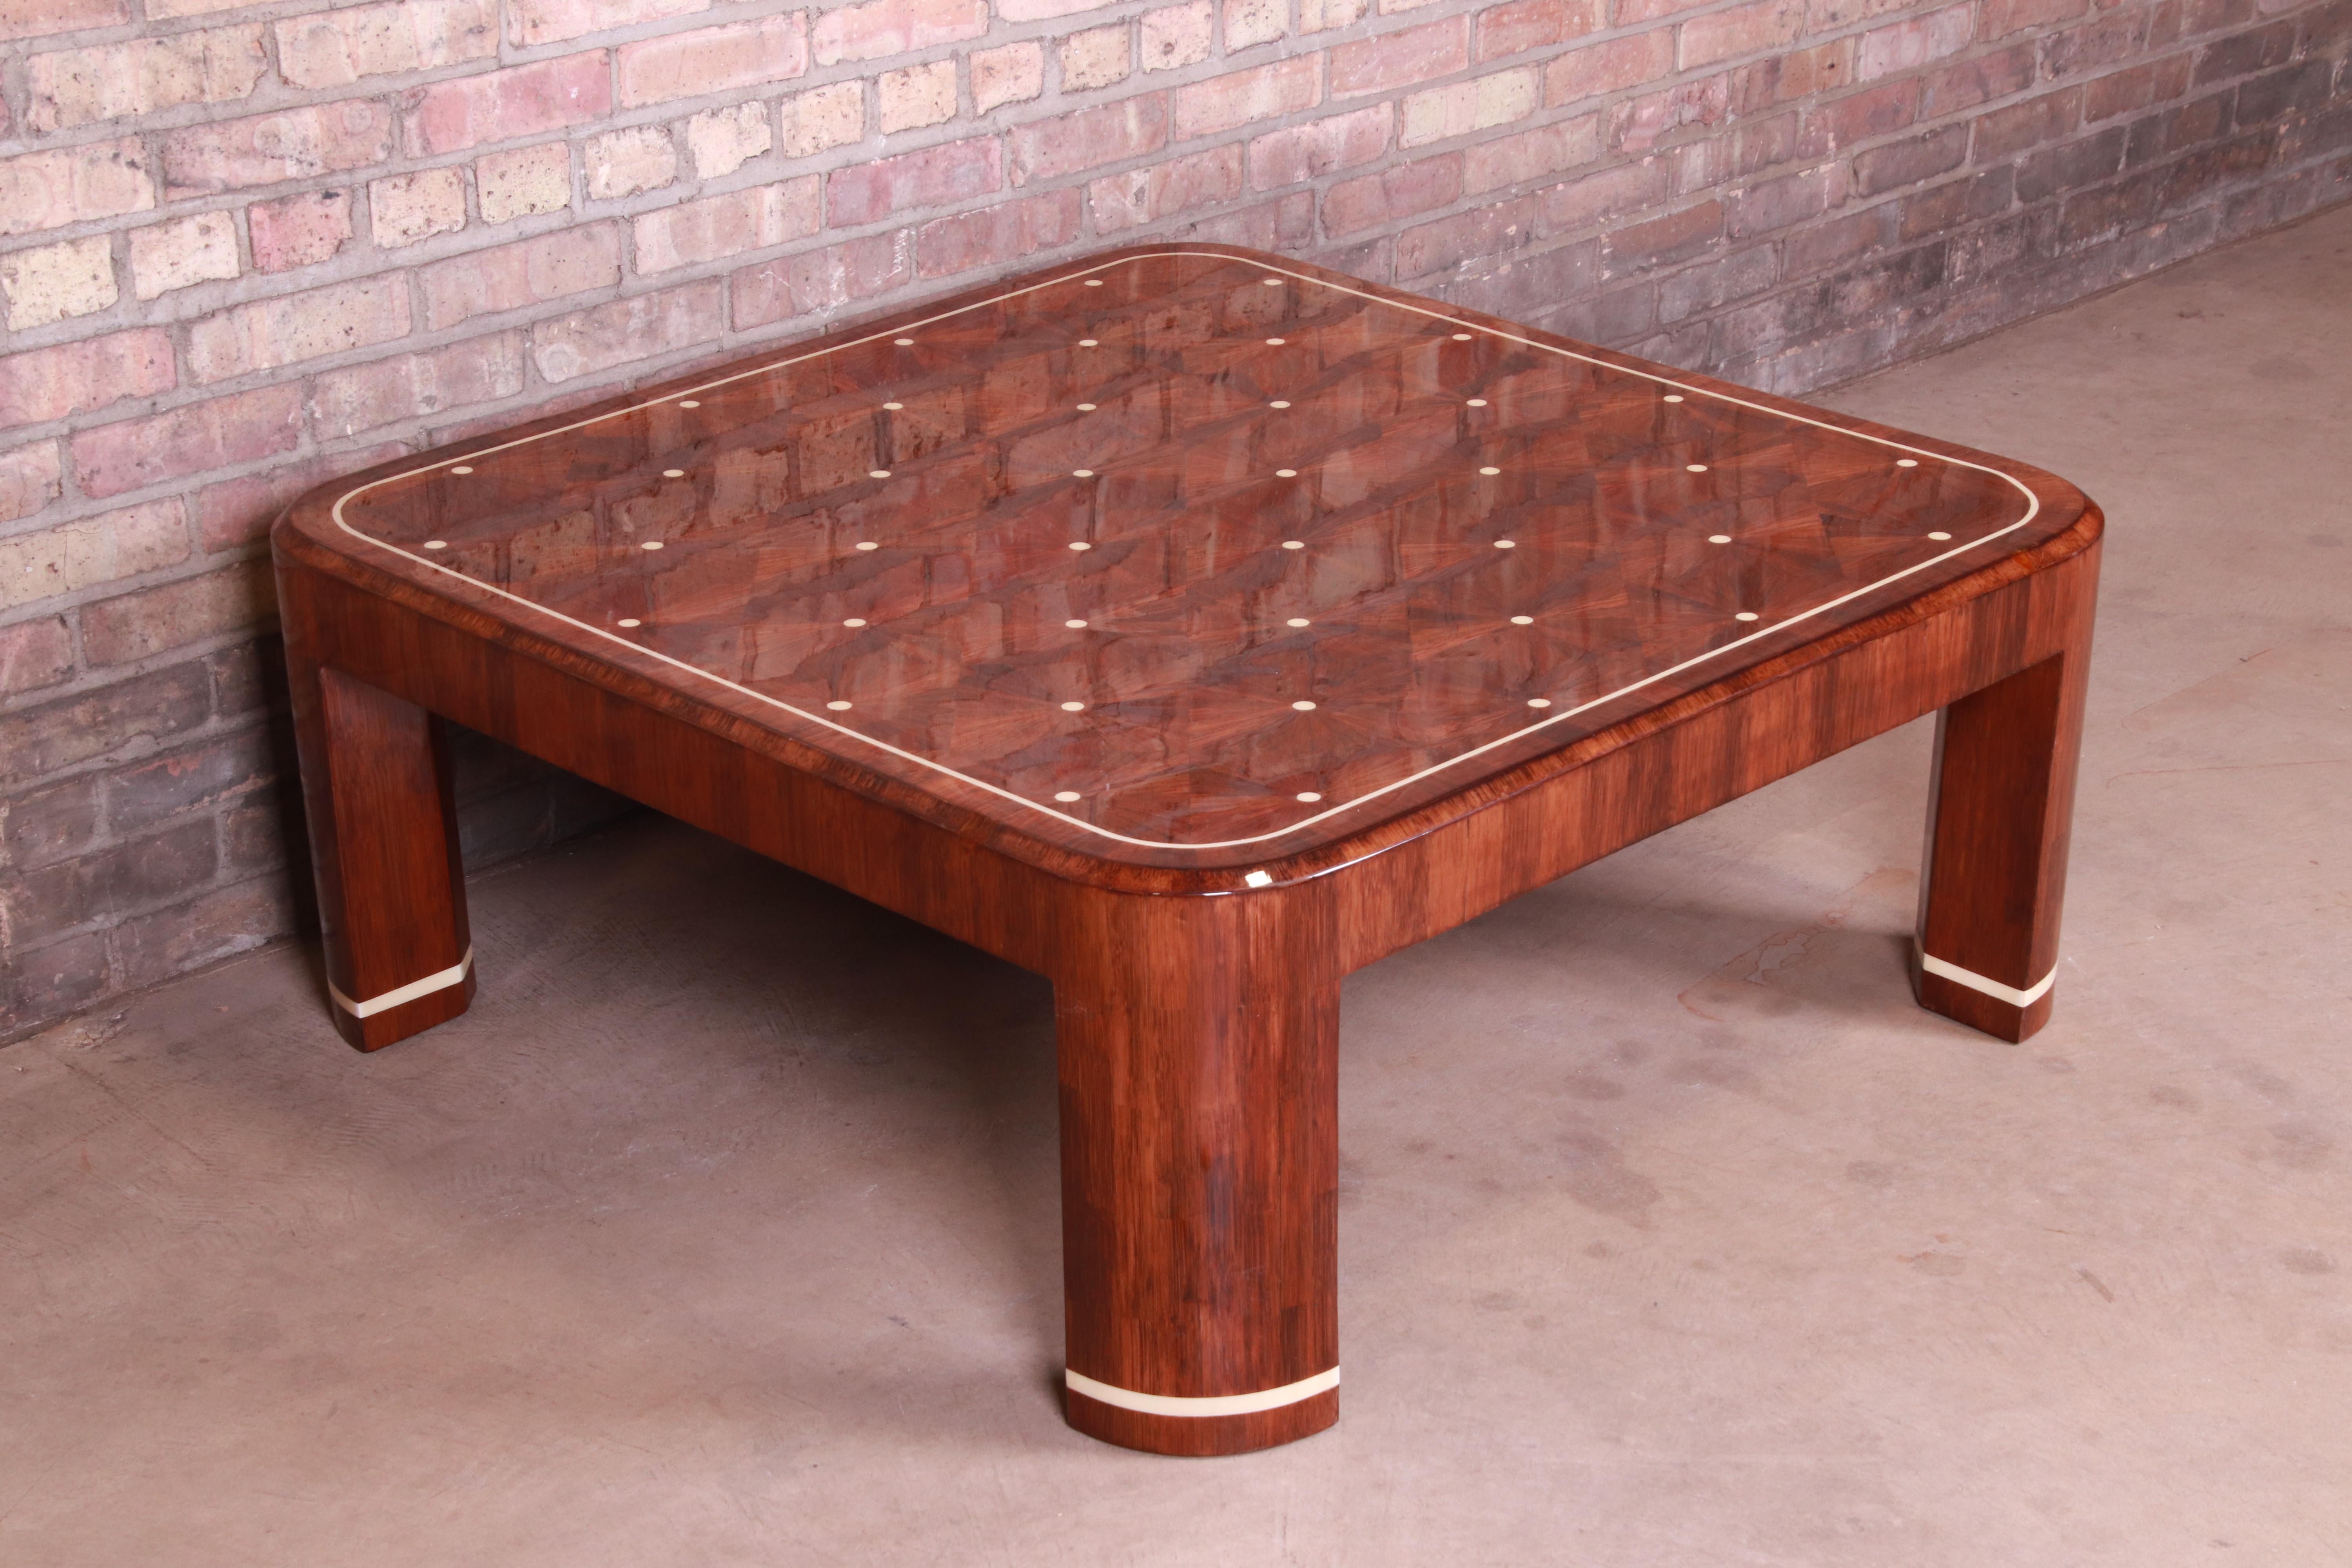 Modern Ron Seff Starburst Marquetry Cocktail Table, Newly Restored For Sale